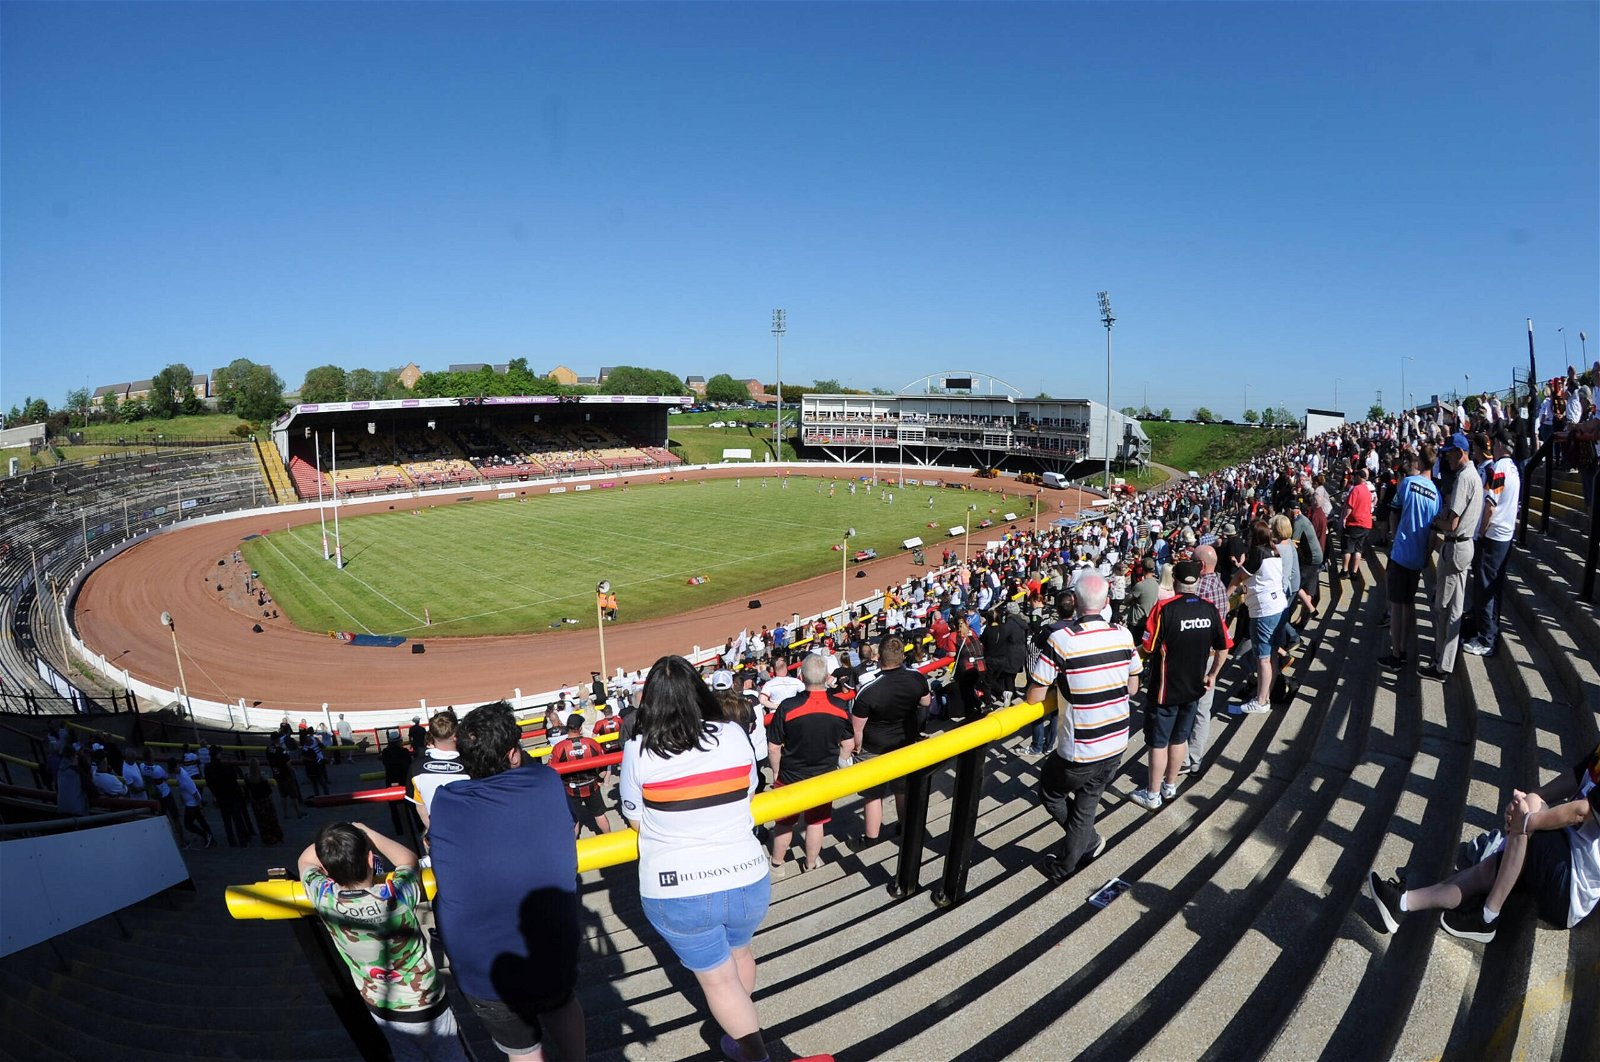 Bradford Bulls will welcome Widnes Vikings to Odsal in one of the broadcast games from Round Four. CHampionship